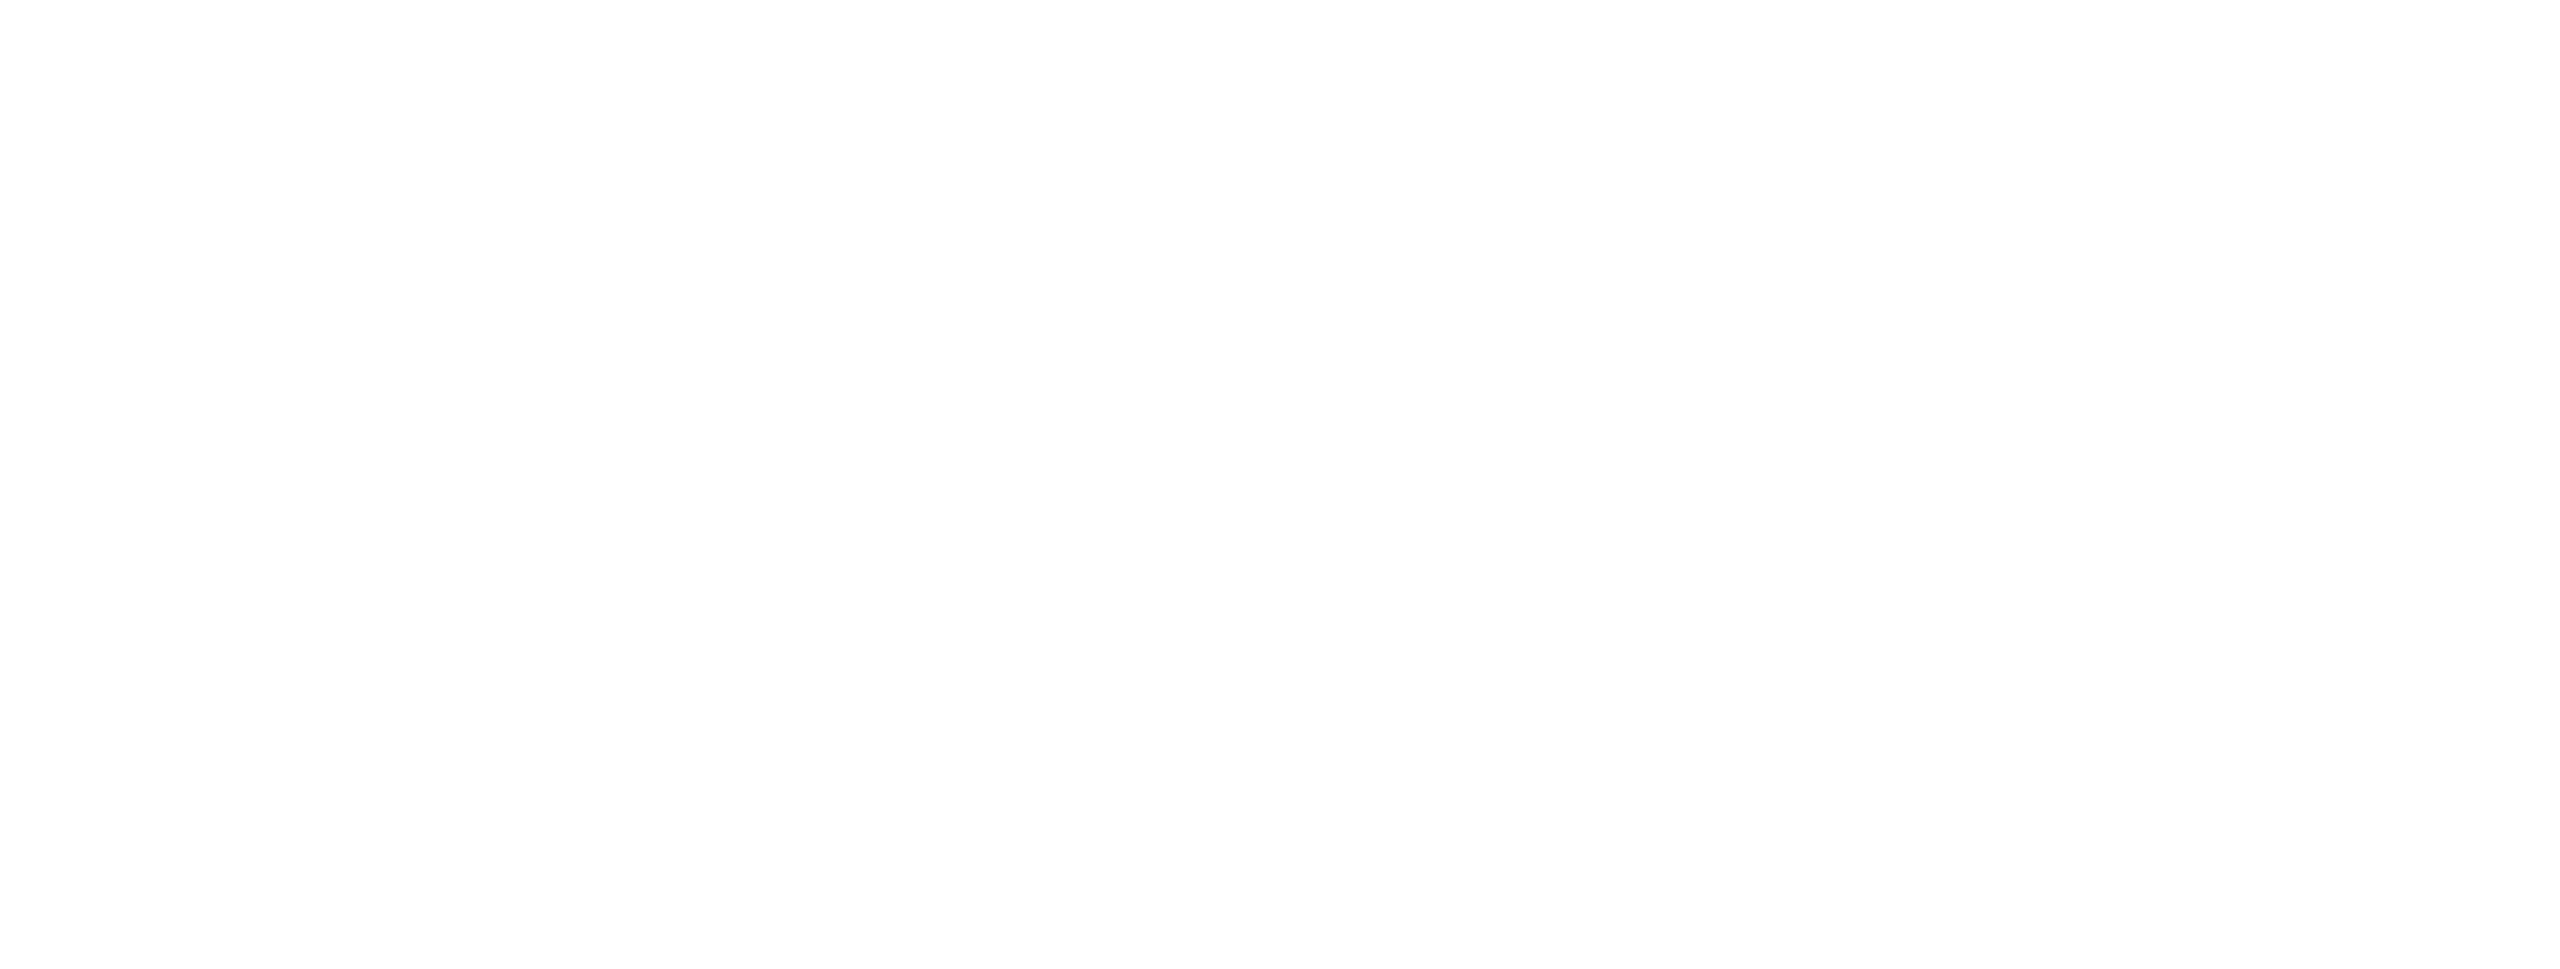 Cleveland CPA Accounting Firm | Barnes Wendling CPAs